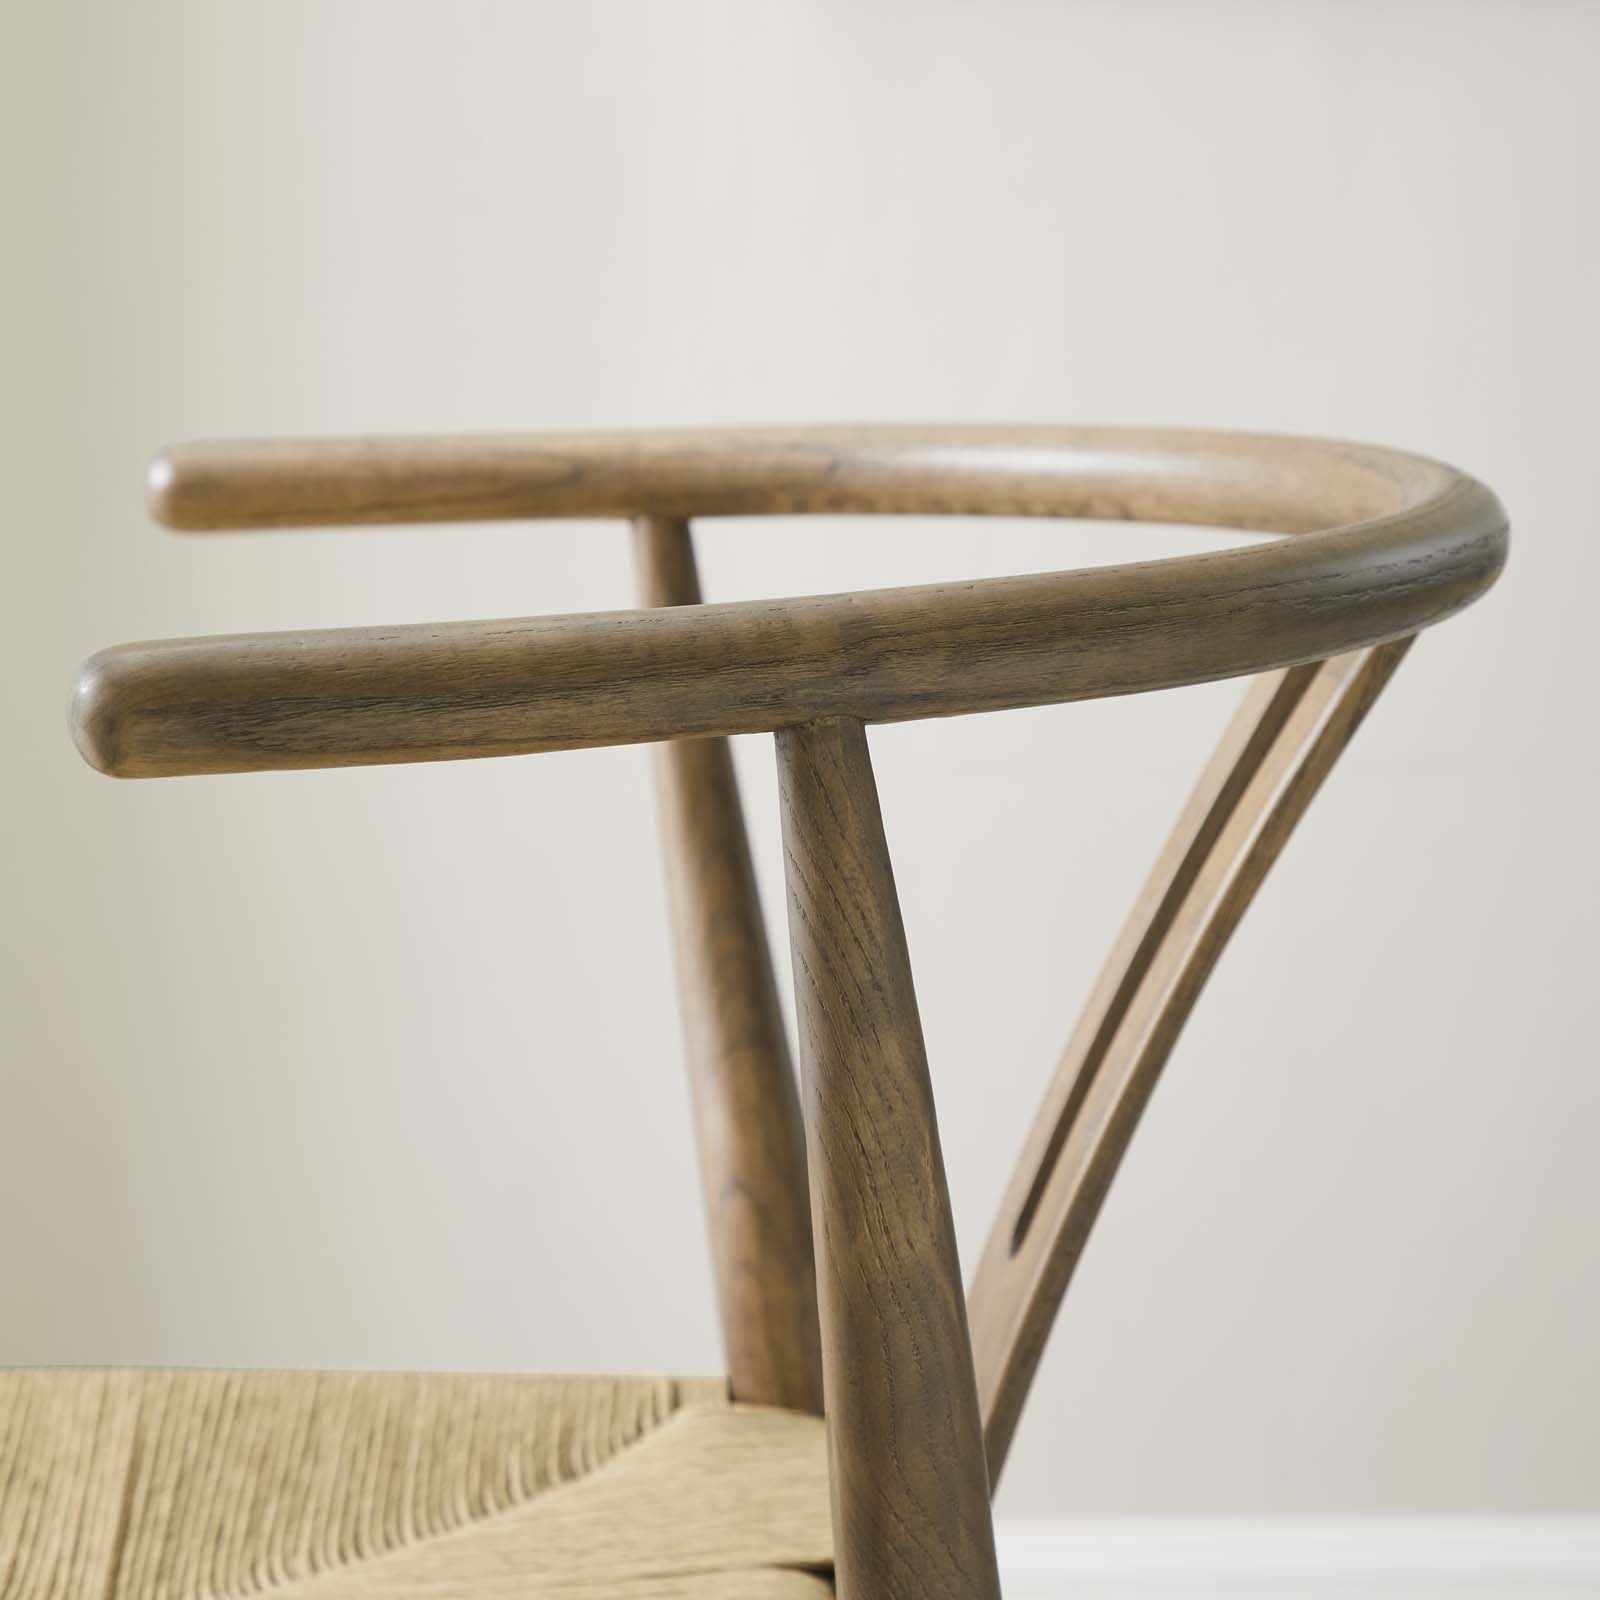 Amish Wood Counter Stool - East Shore Modern Home Furnishings